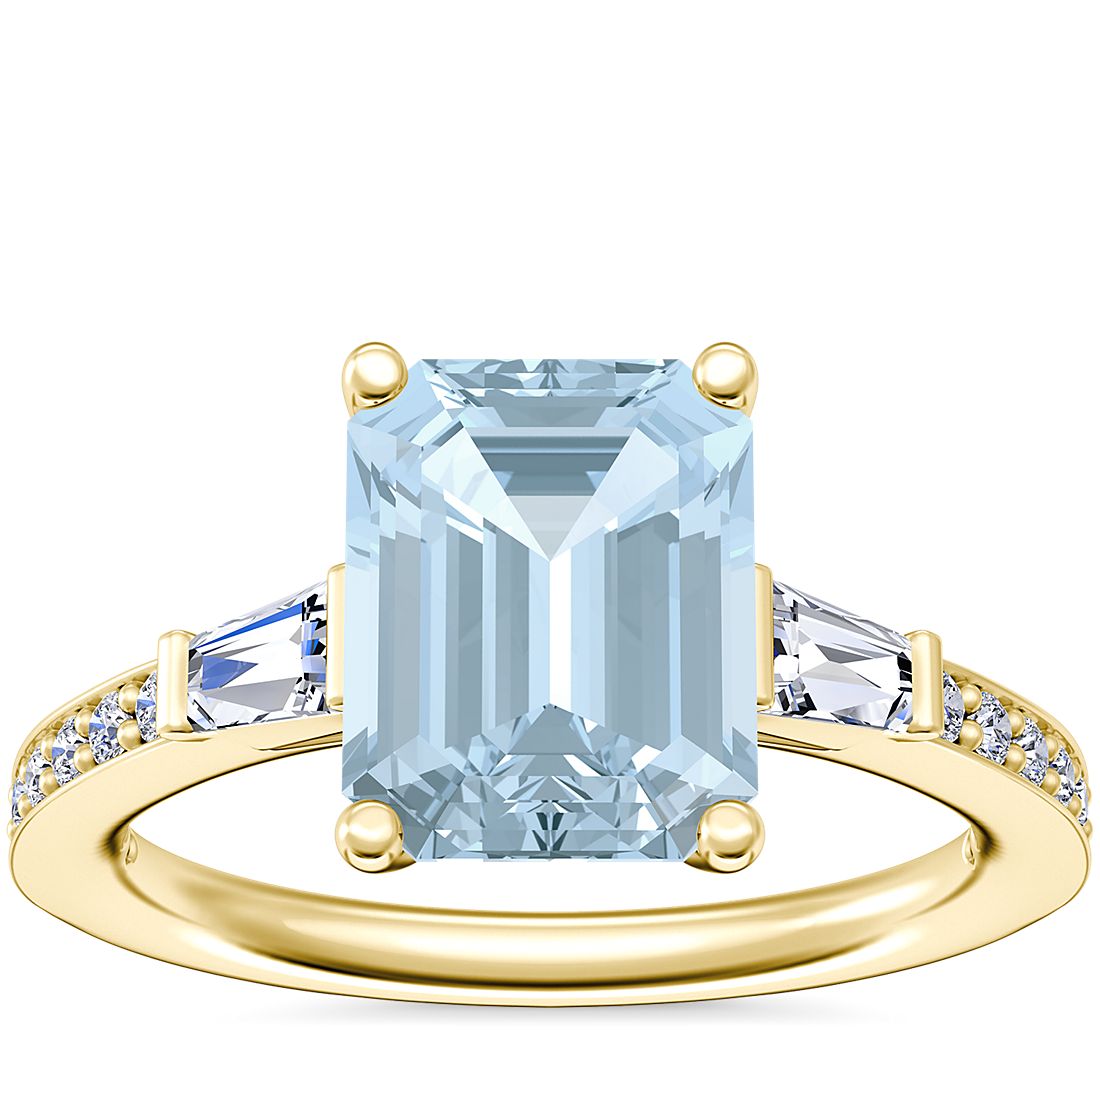 Tapered Baguette Diamond Cathedral Engagement Ring with Emerald-Cut Aquamarine in 14k Yellow Gold (9x7mm)